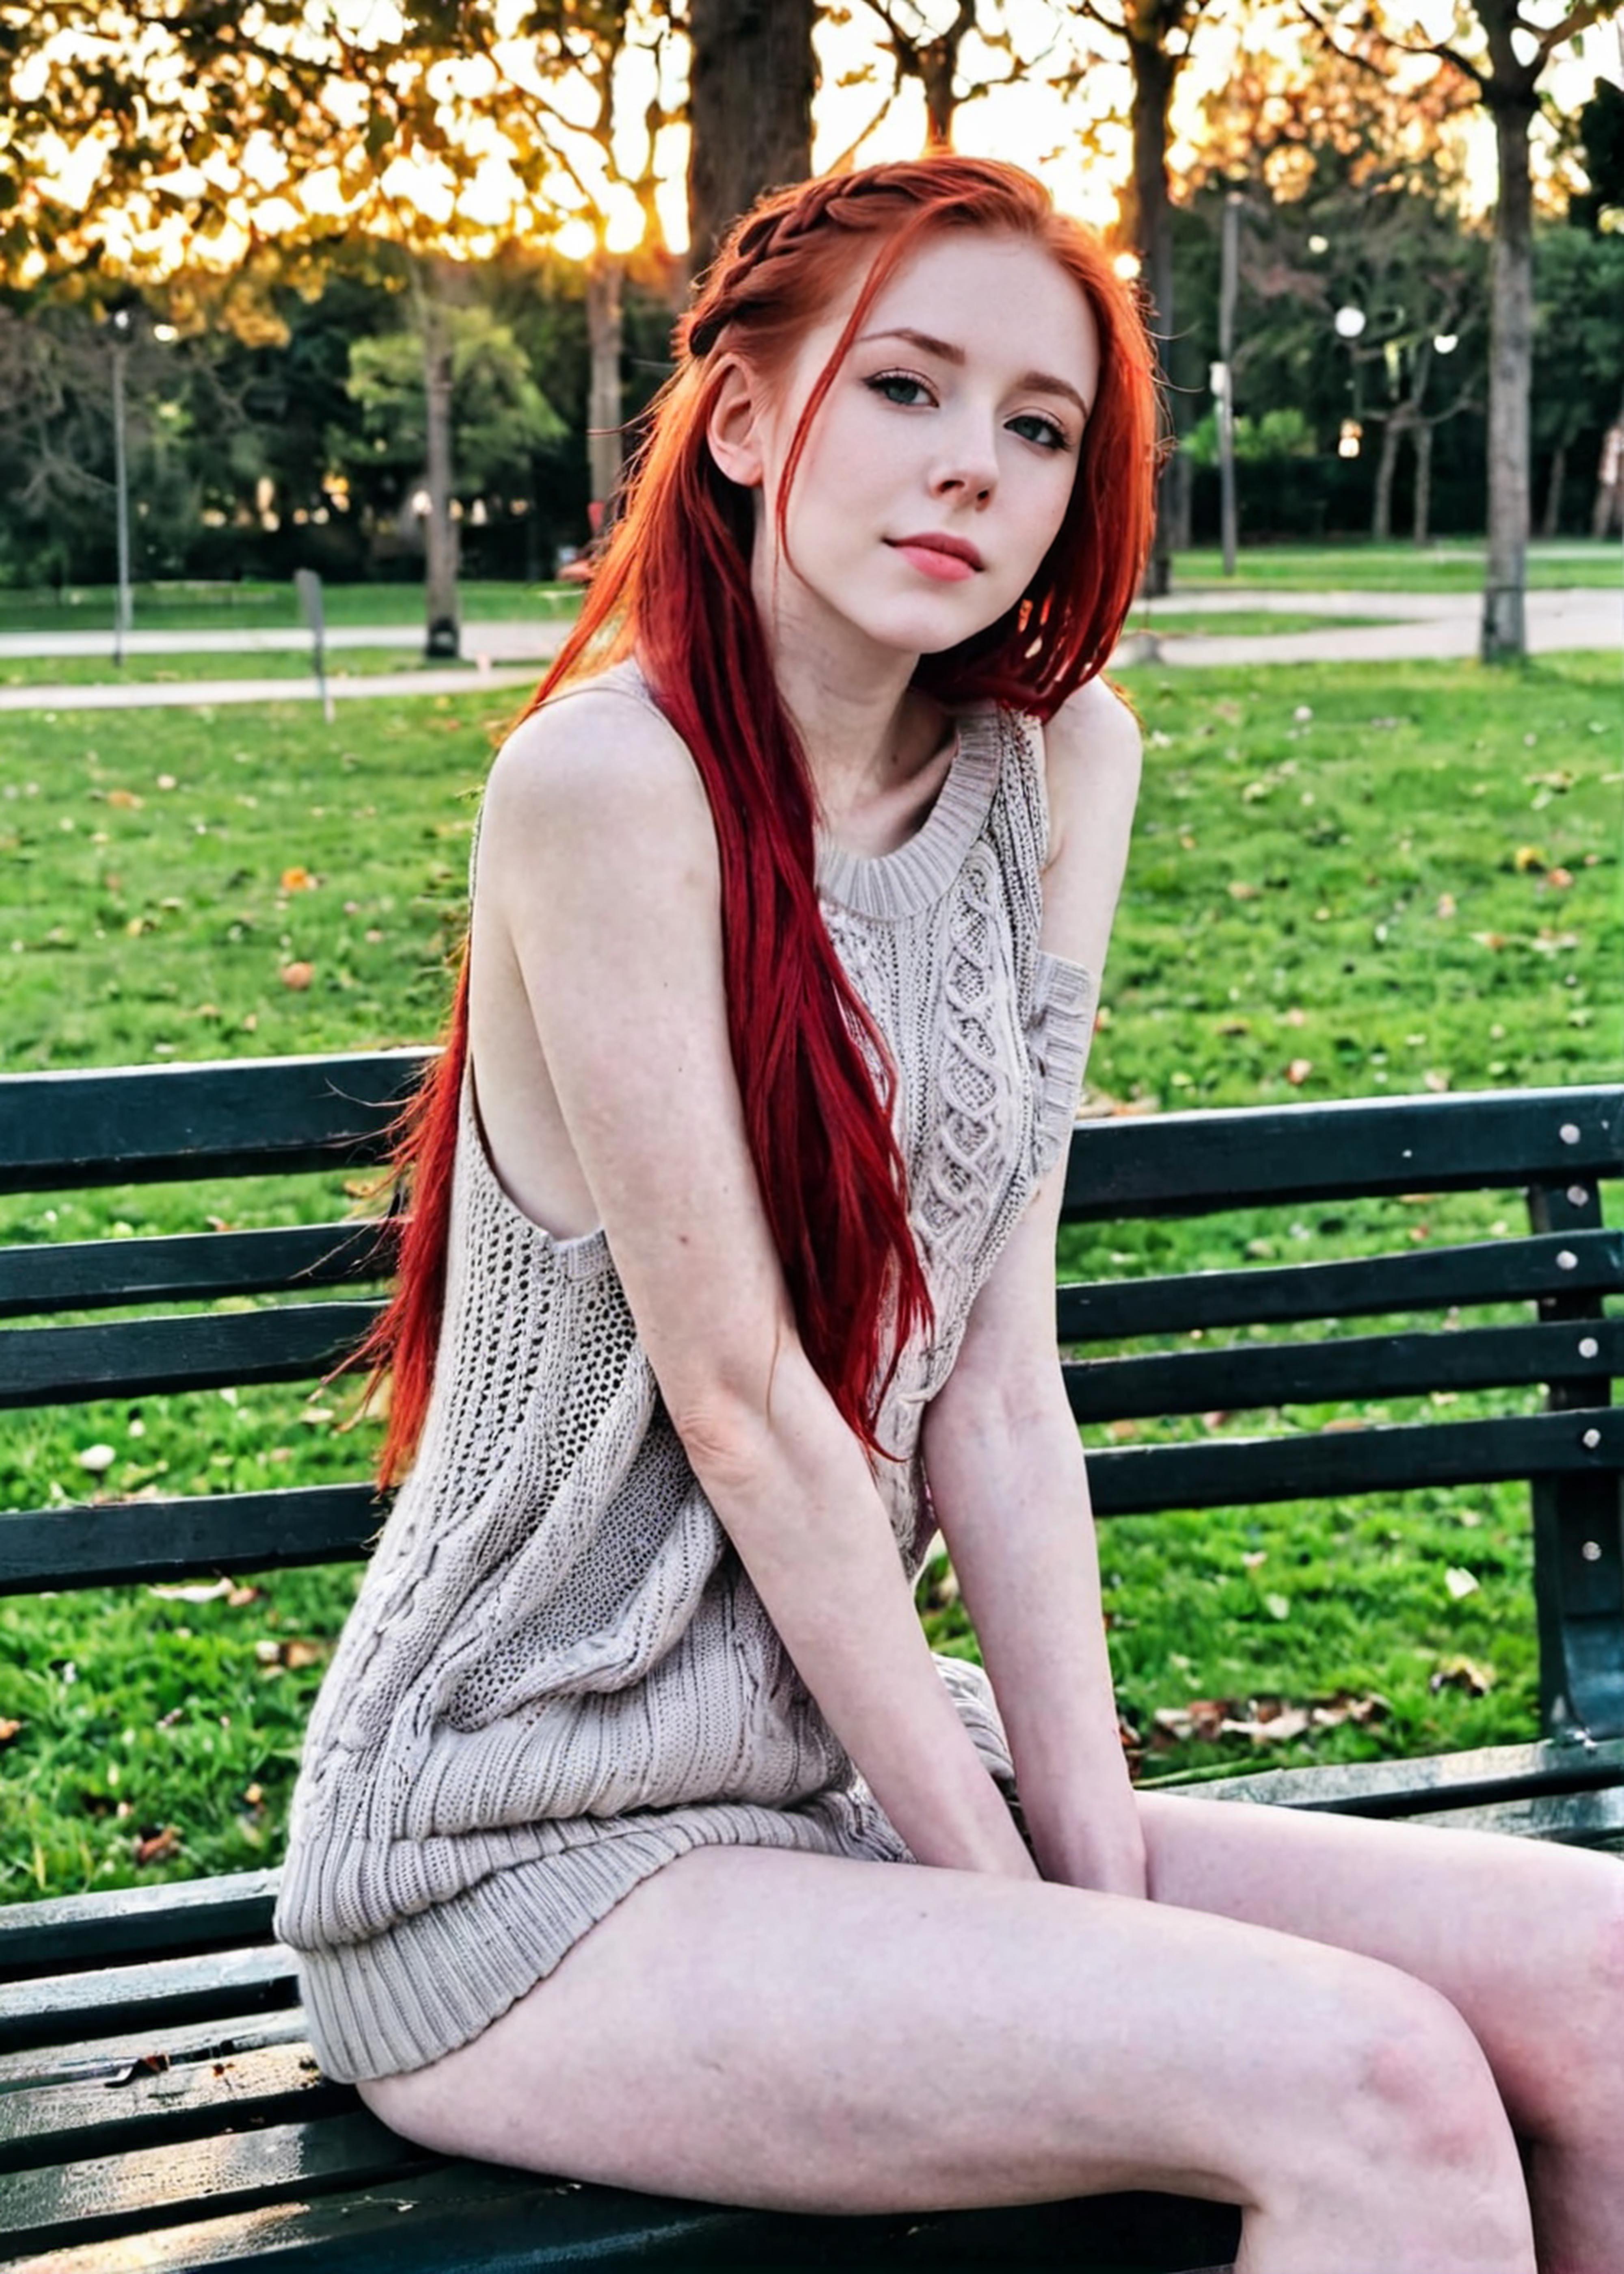 A woman with red hair sitting on a park bench.